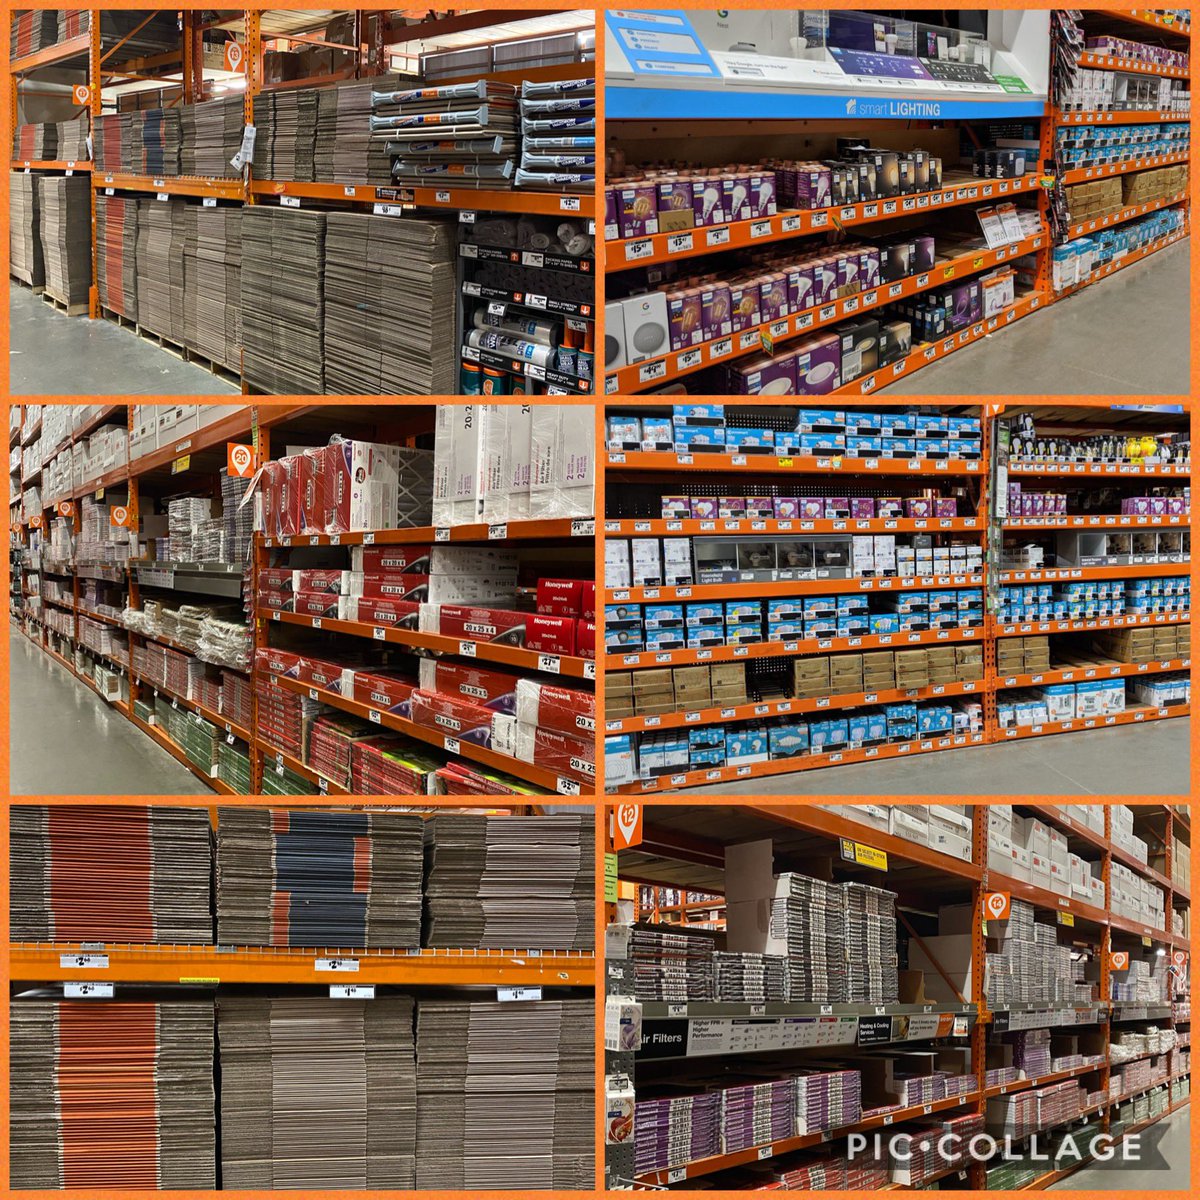 great job merrifield Blitz team getting product on the shelves for the customers 🧡🔥👏🏼💯 #storerefresh #D278 #orangeproud #homedepotstrong #successsharing2020 #chingching4605$$ @PaulDeveno @RMoutranTHD @navruprai @CollazoH @JDorseyTHD @ThdRmotran @JustTY4605 @CarlMyrville